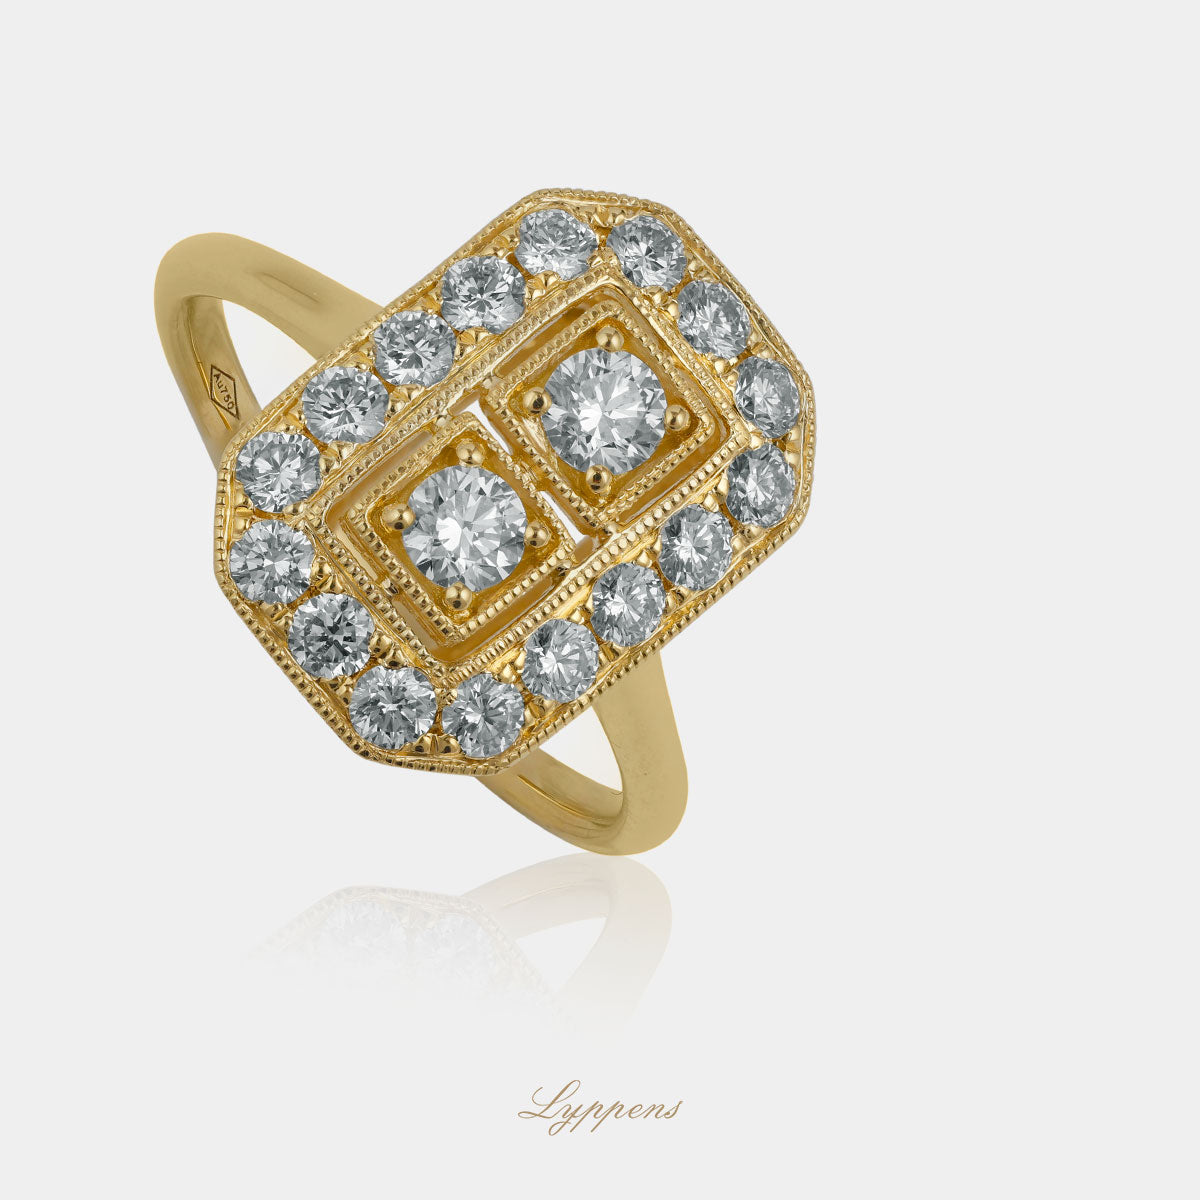 Yellow gold art deco style ring with diamond